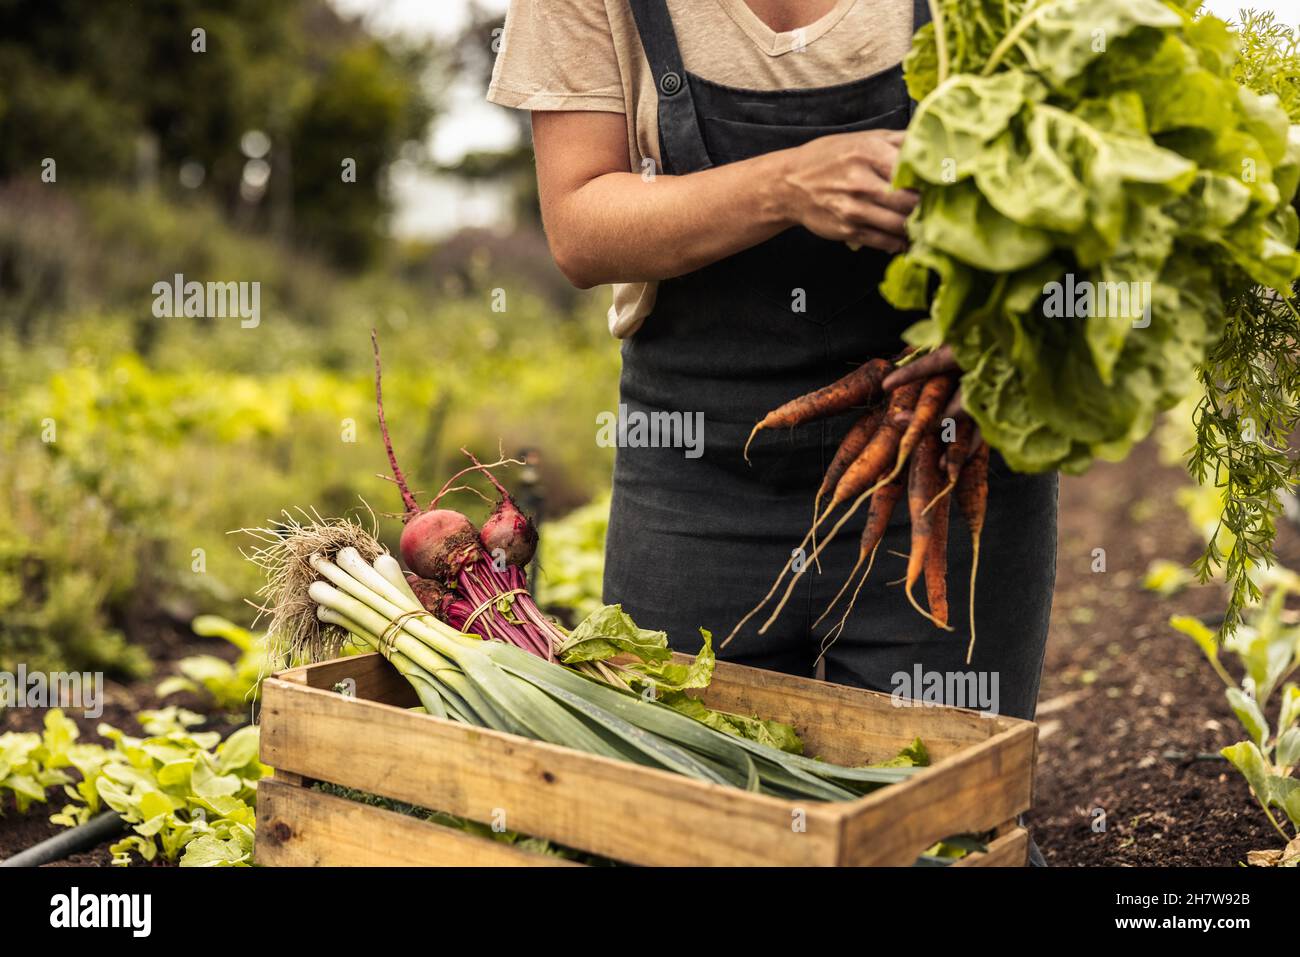 Female farmer arranging freshly picked vegetables into a crate on an organic farm. Self-sustainable young woman gathering fresh green produce in her g Stock Photo